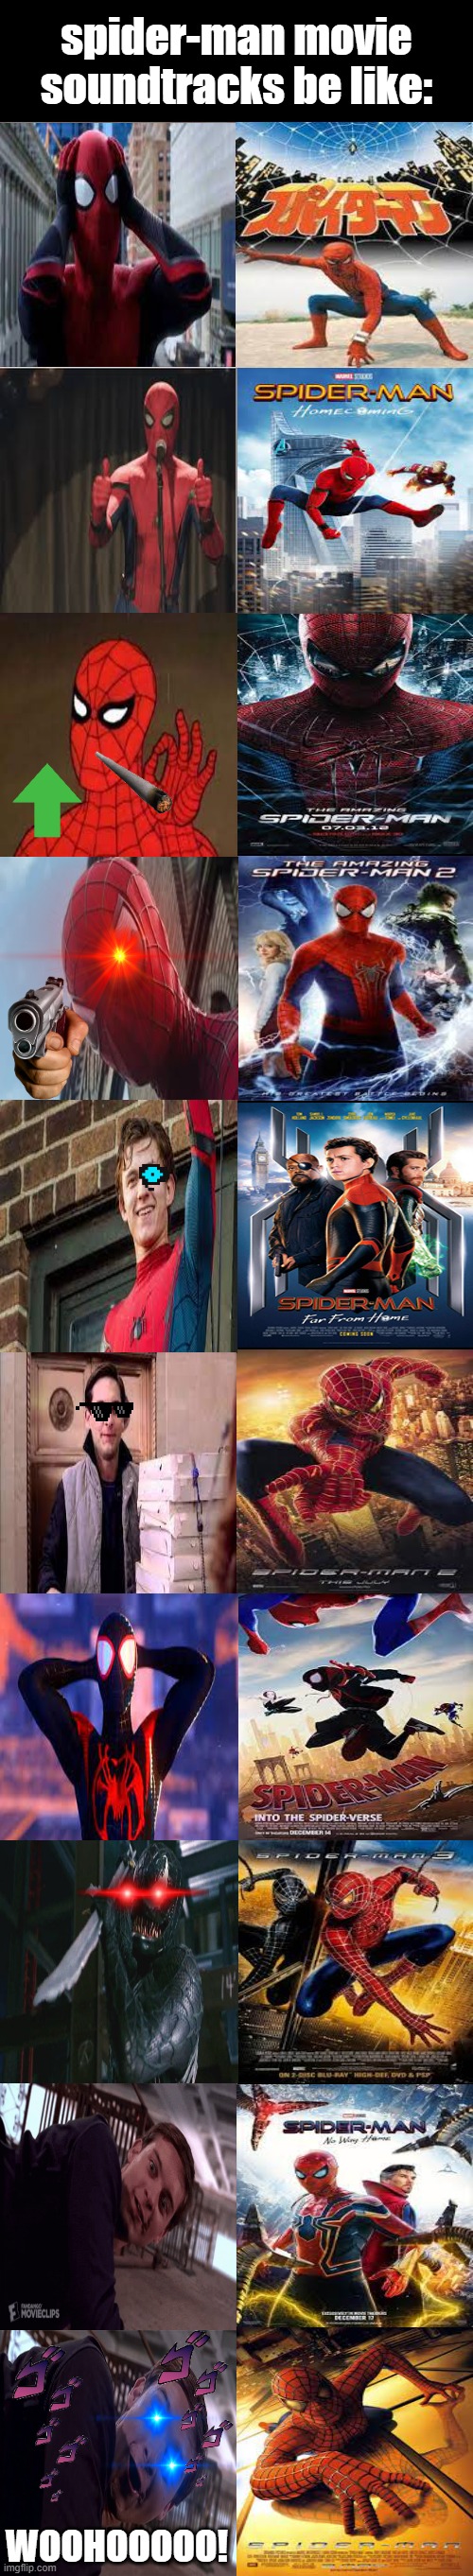 mr incredible becoming canny | spider-man movie soundtracks be like:; WOOHOOOOO! | image tagged in mr incredible becoming canny,spiderman,spider-man,spider man,movies,theme song | made w/ Imgflip meme maker